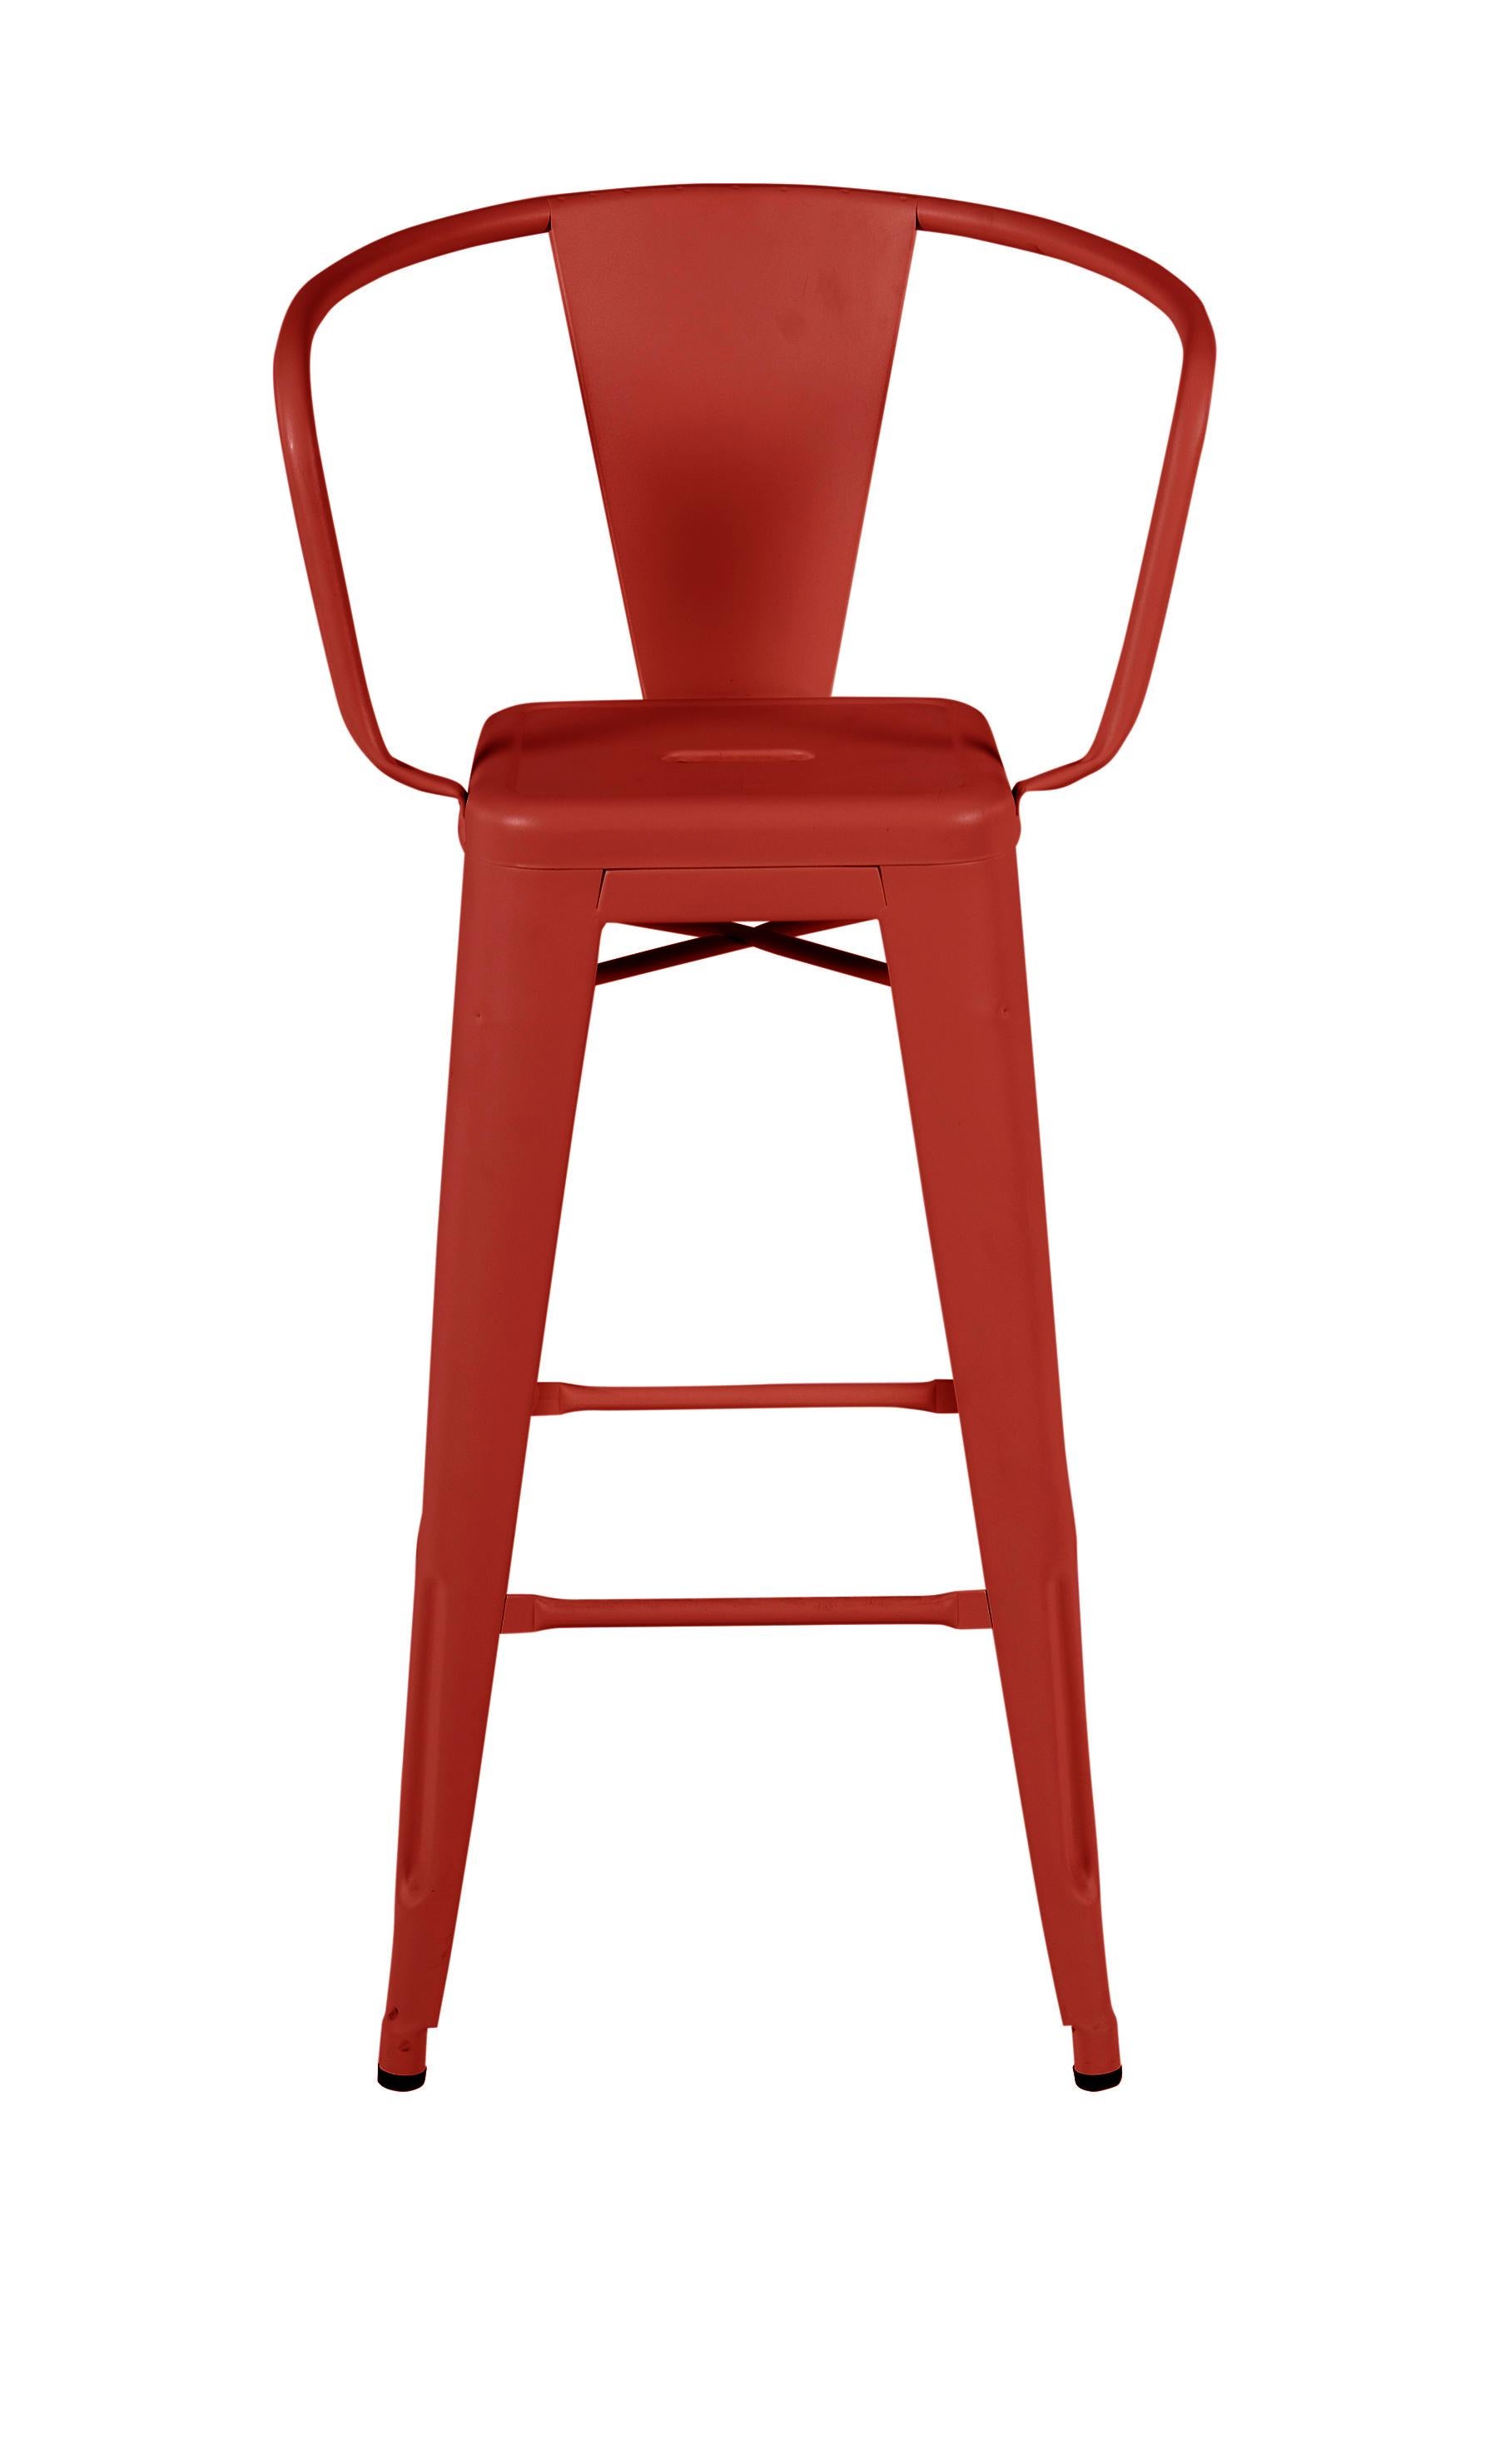 For Sale: Red (Piment) HA75 Steel Stool in Essential Colors by Tolix